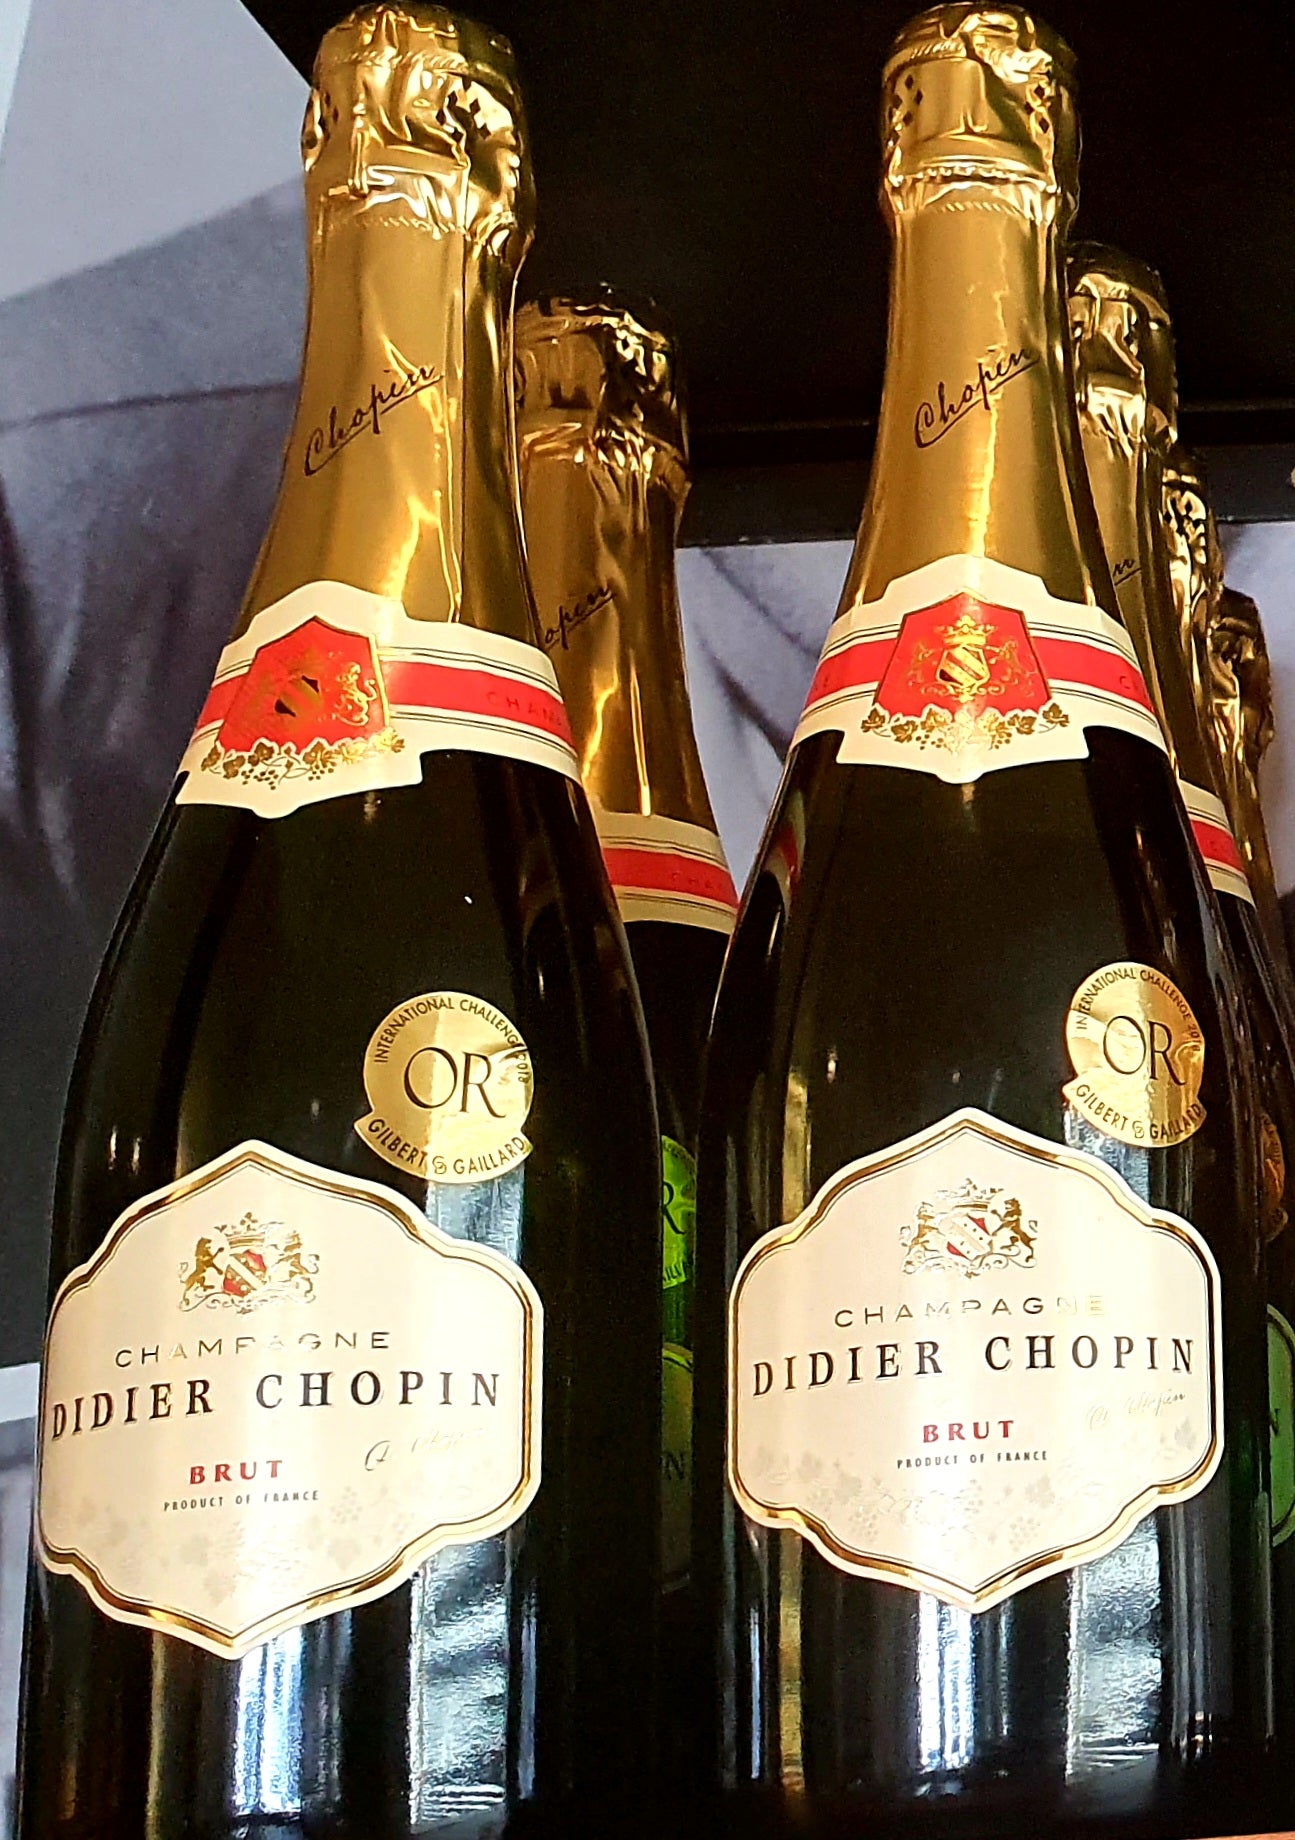 Didier Chopin Brut Champagne France